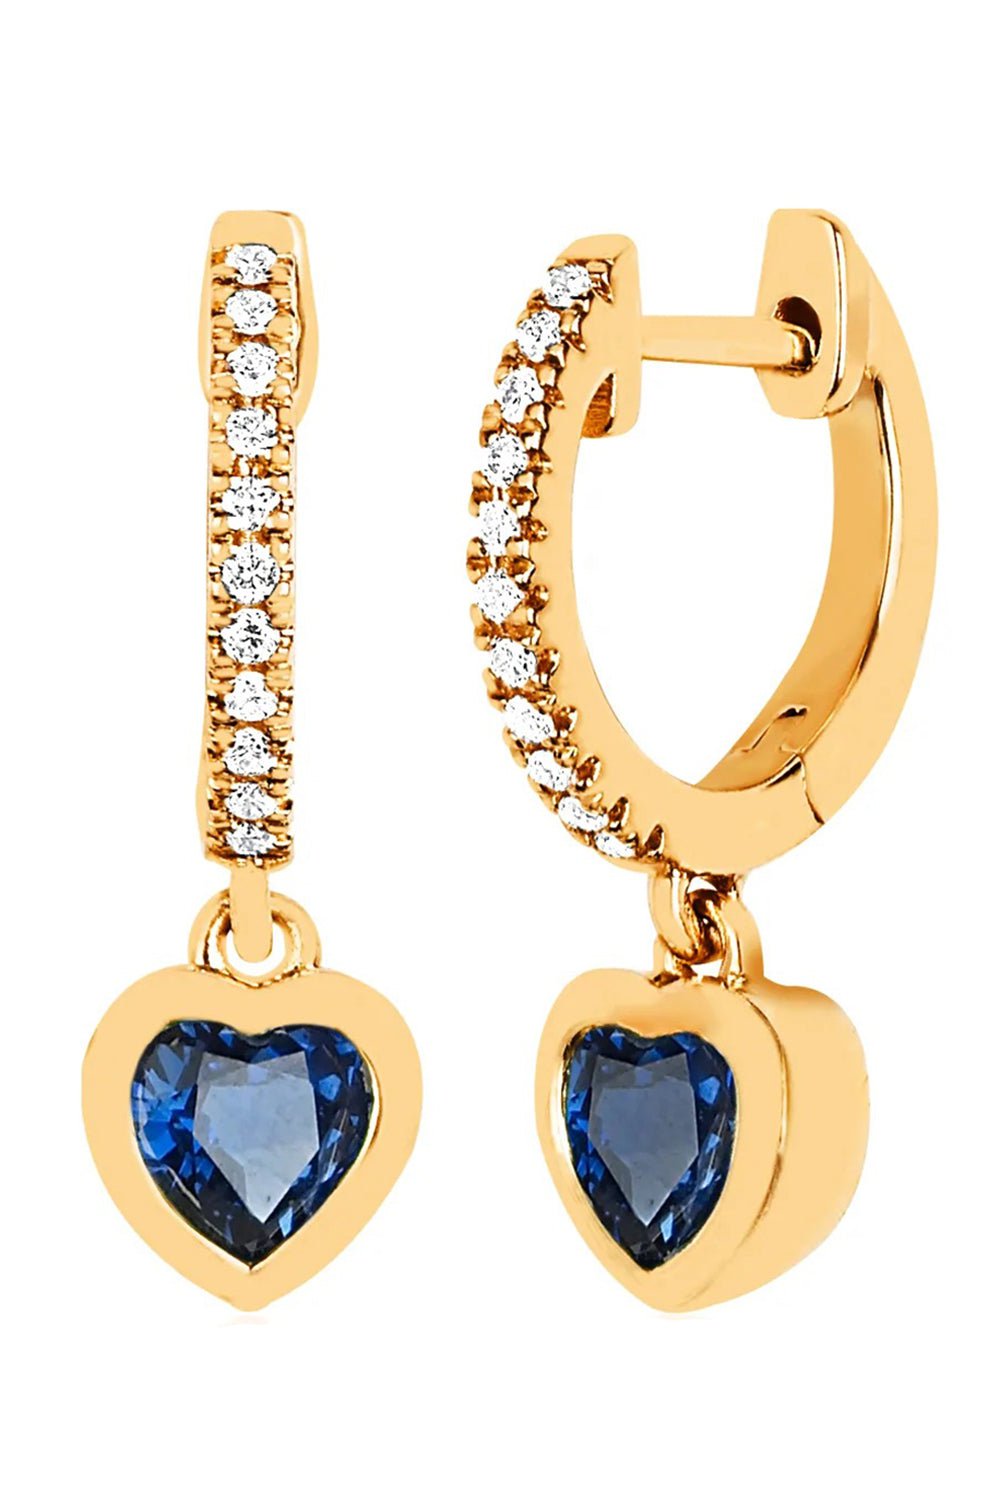 EF COLLECTION-Blue Sapphire Heart Drop Earrings-YELLOW GOLD